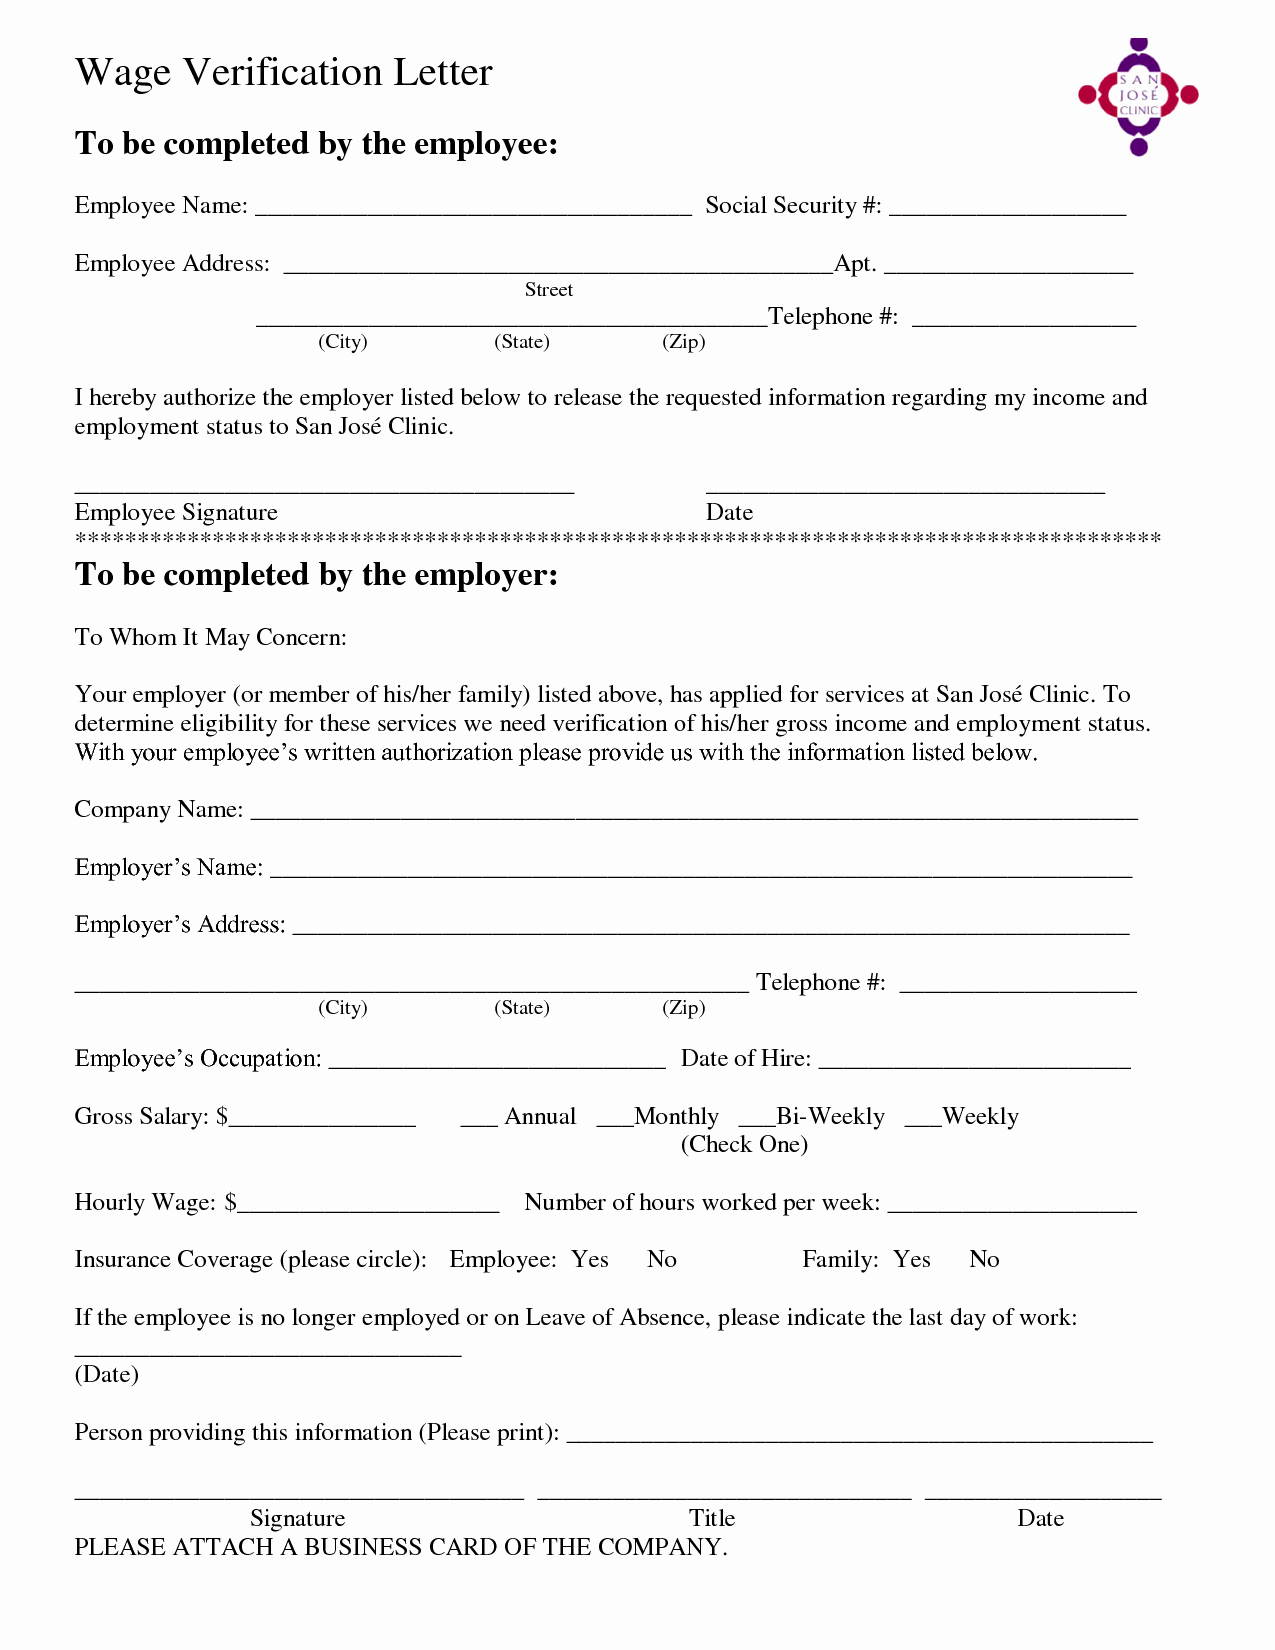 Wage Verification form Template New In E Verification Letter Free Printable Documents